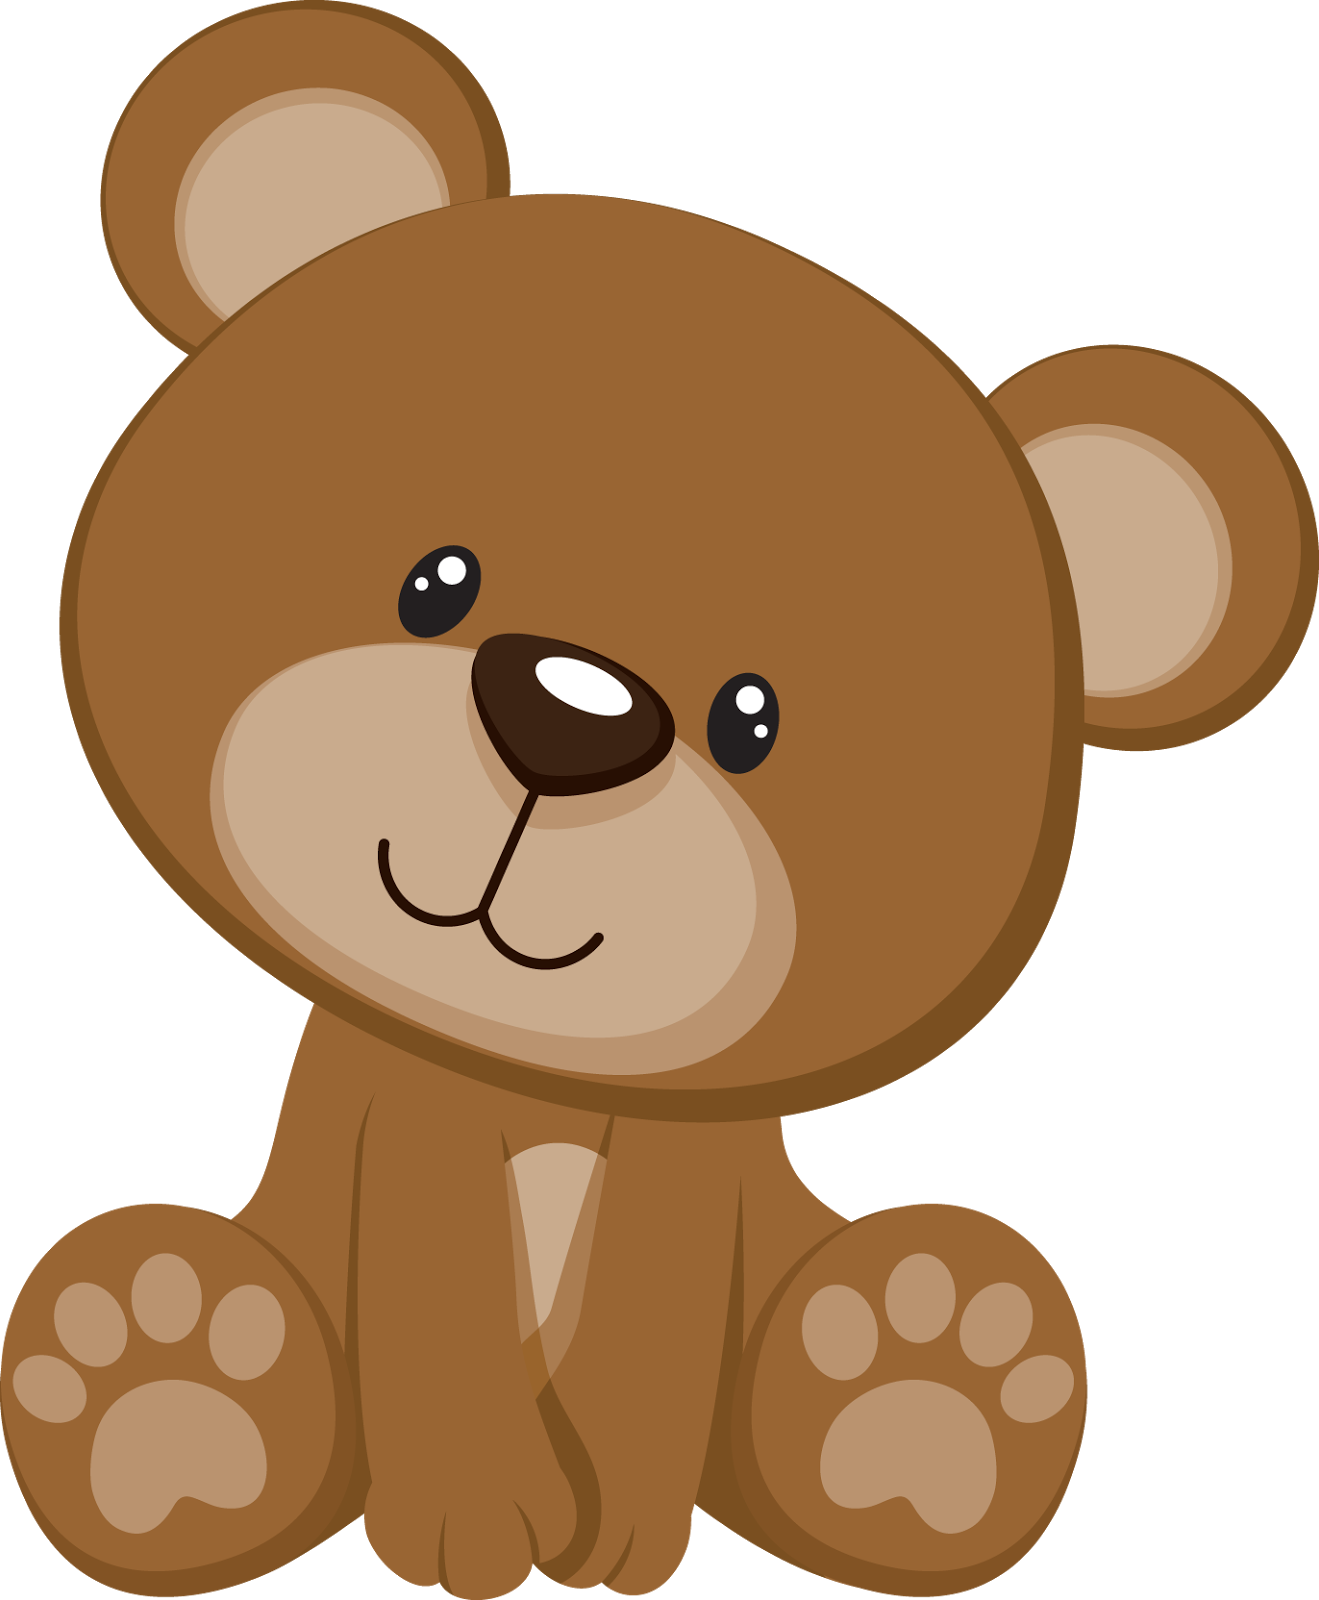 Bear for kids at. Kid clipart head